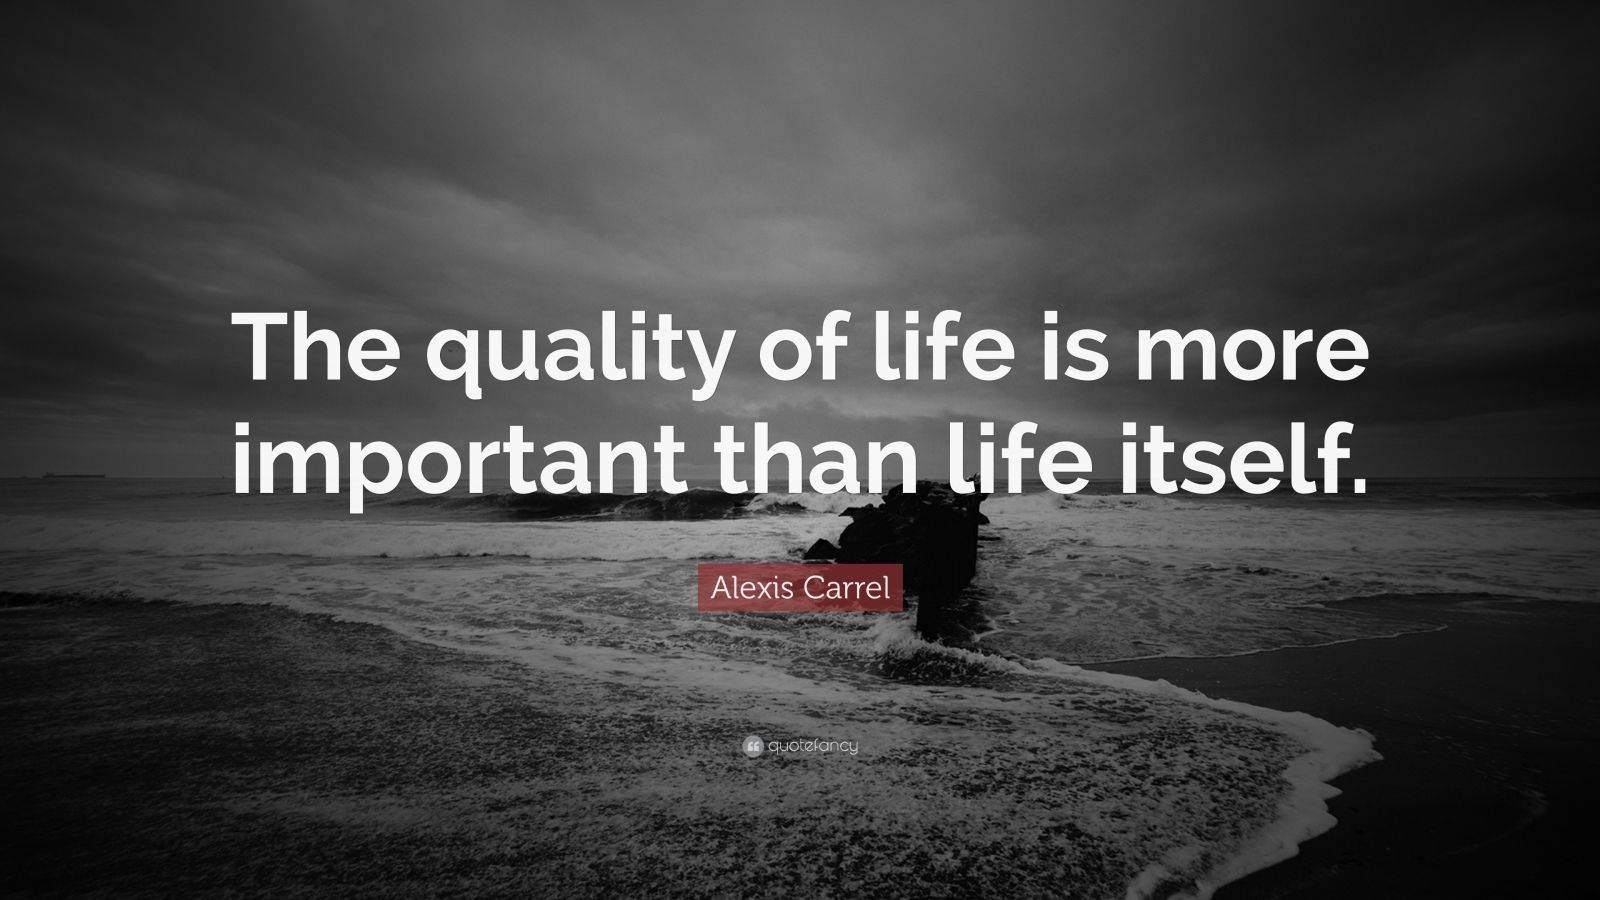 Quality Of Life